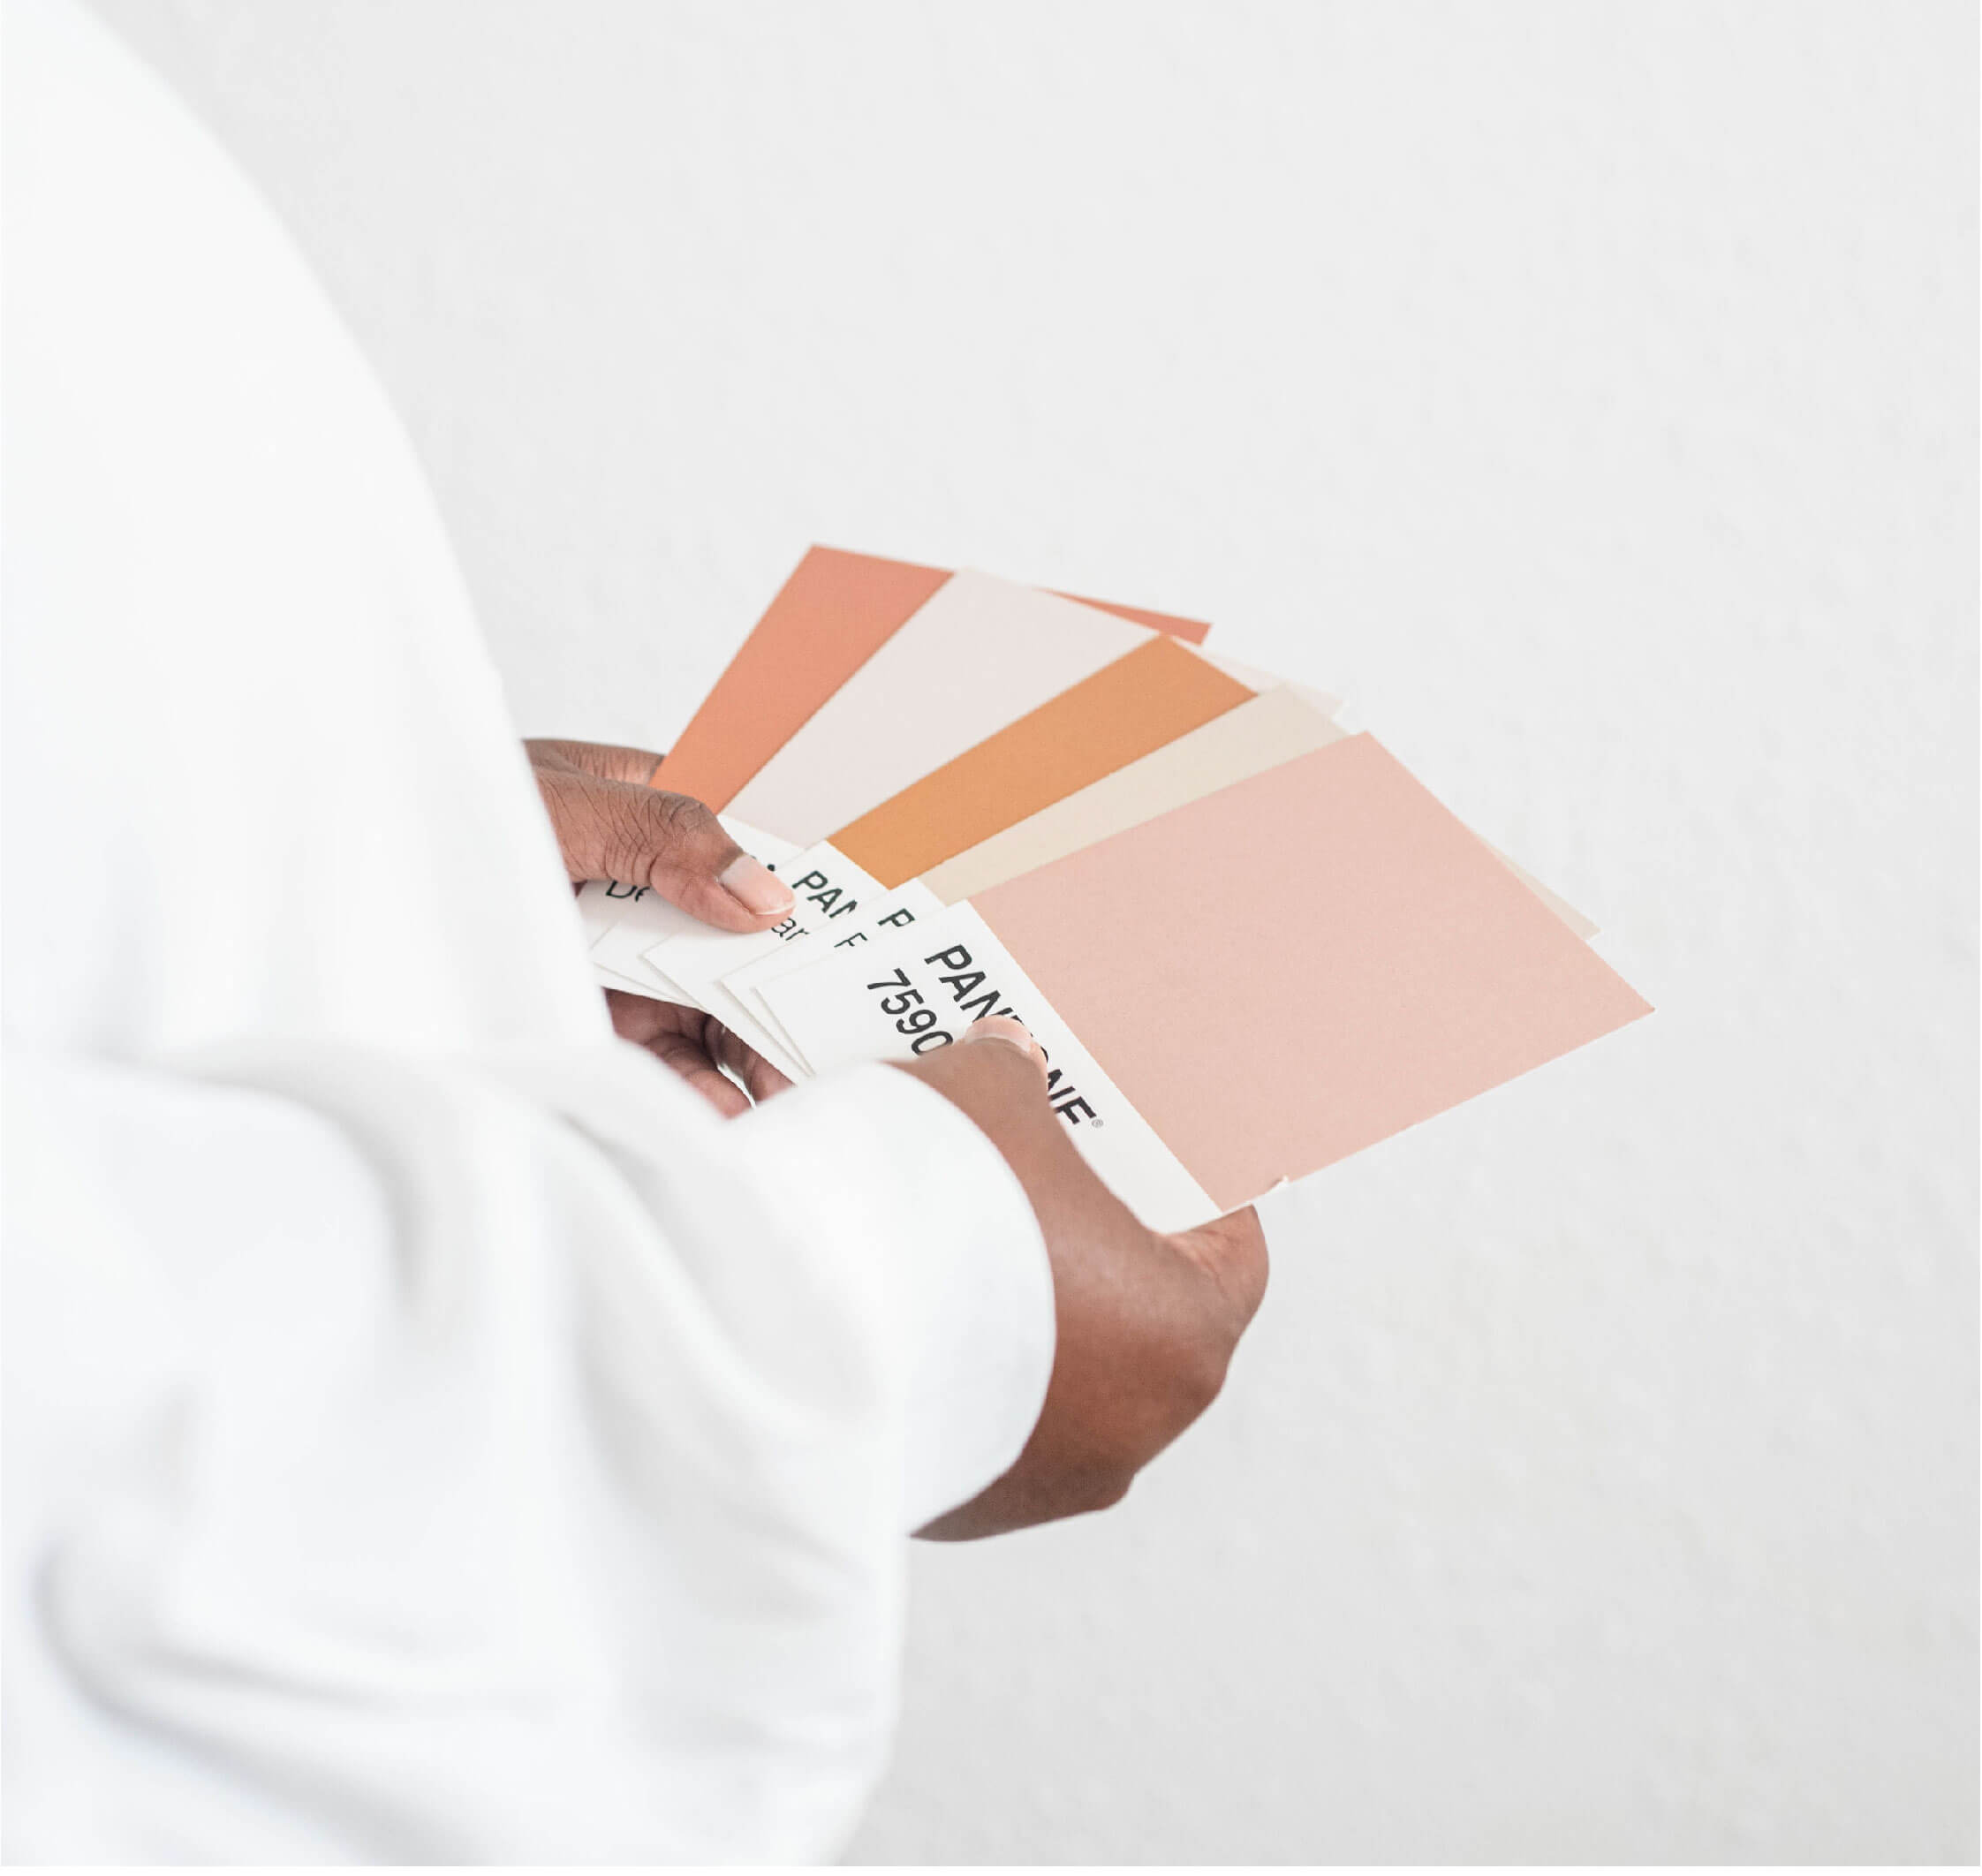 A woman of color holding color swatches.